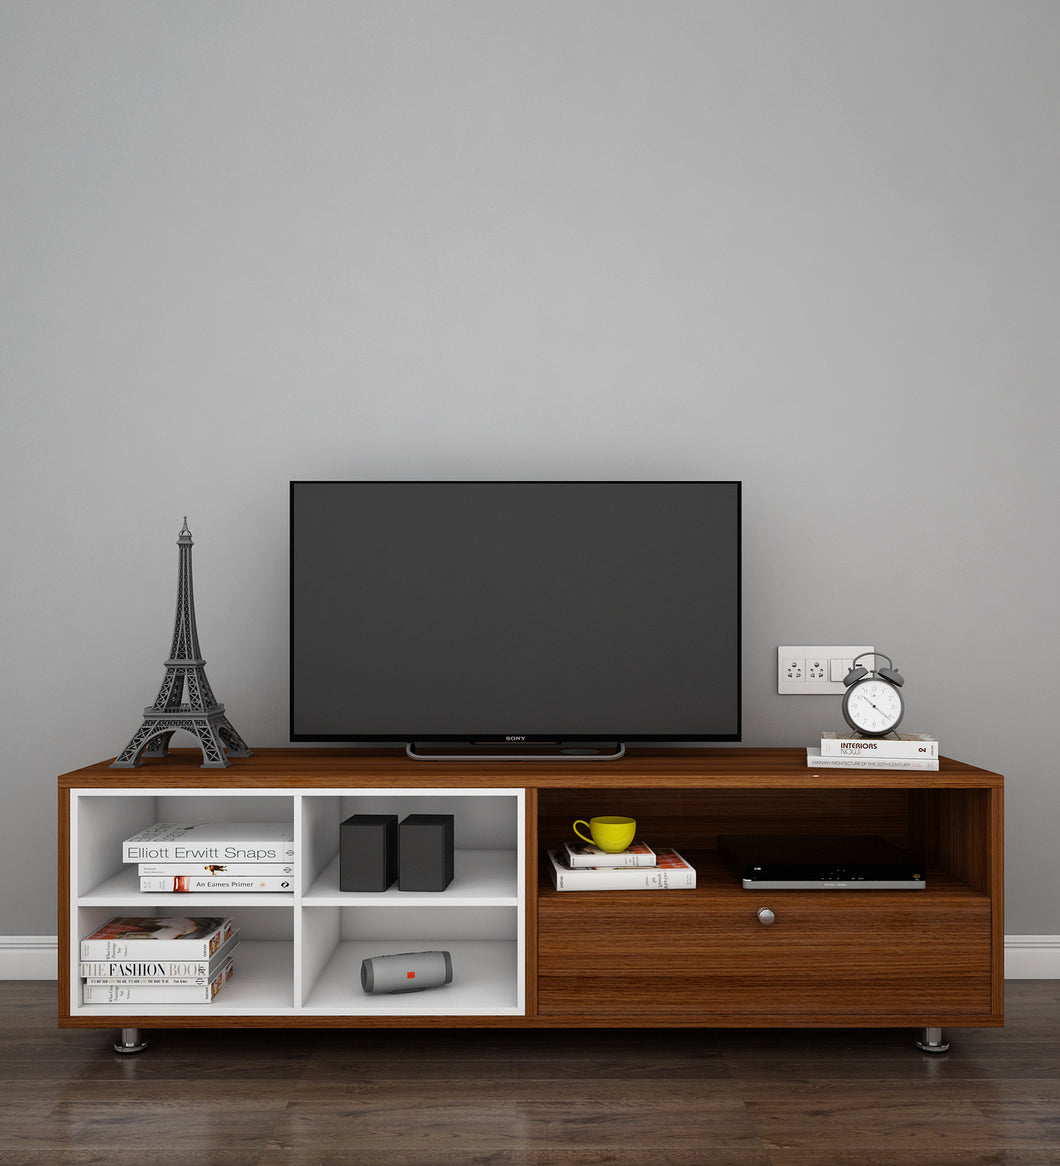 Imperial TV Unit - Up to 65 Inches TV